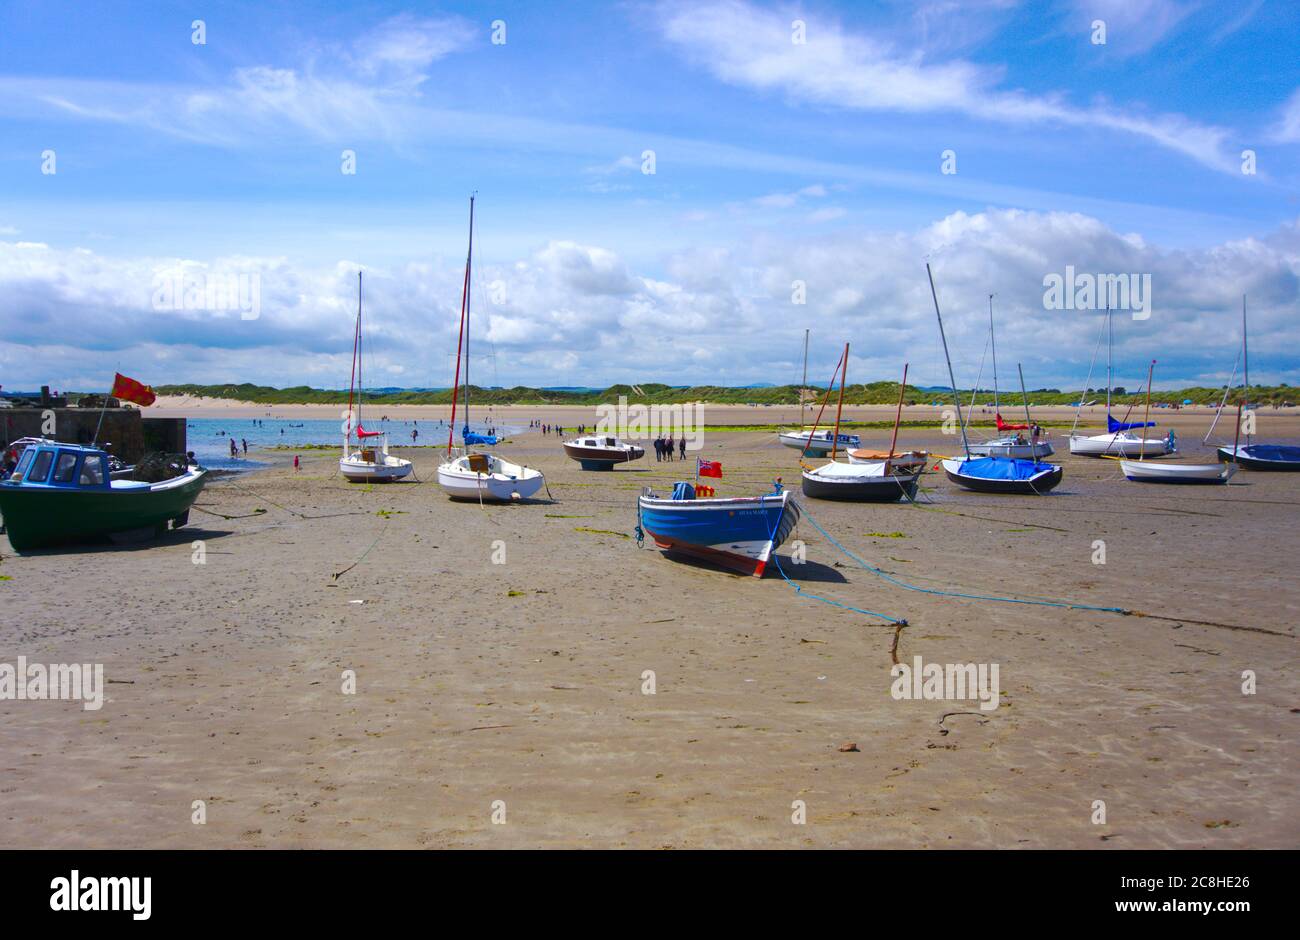 Boats on the sand during low tide at Beadnell beach, Northumberland, UK. Stock Photo